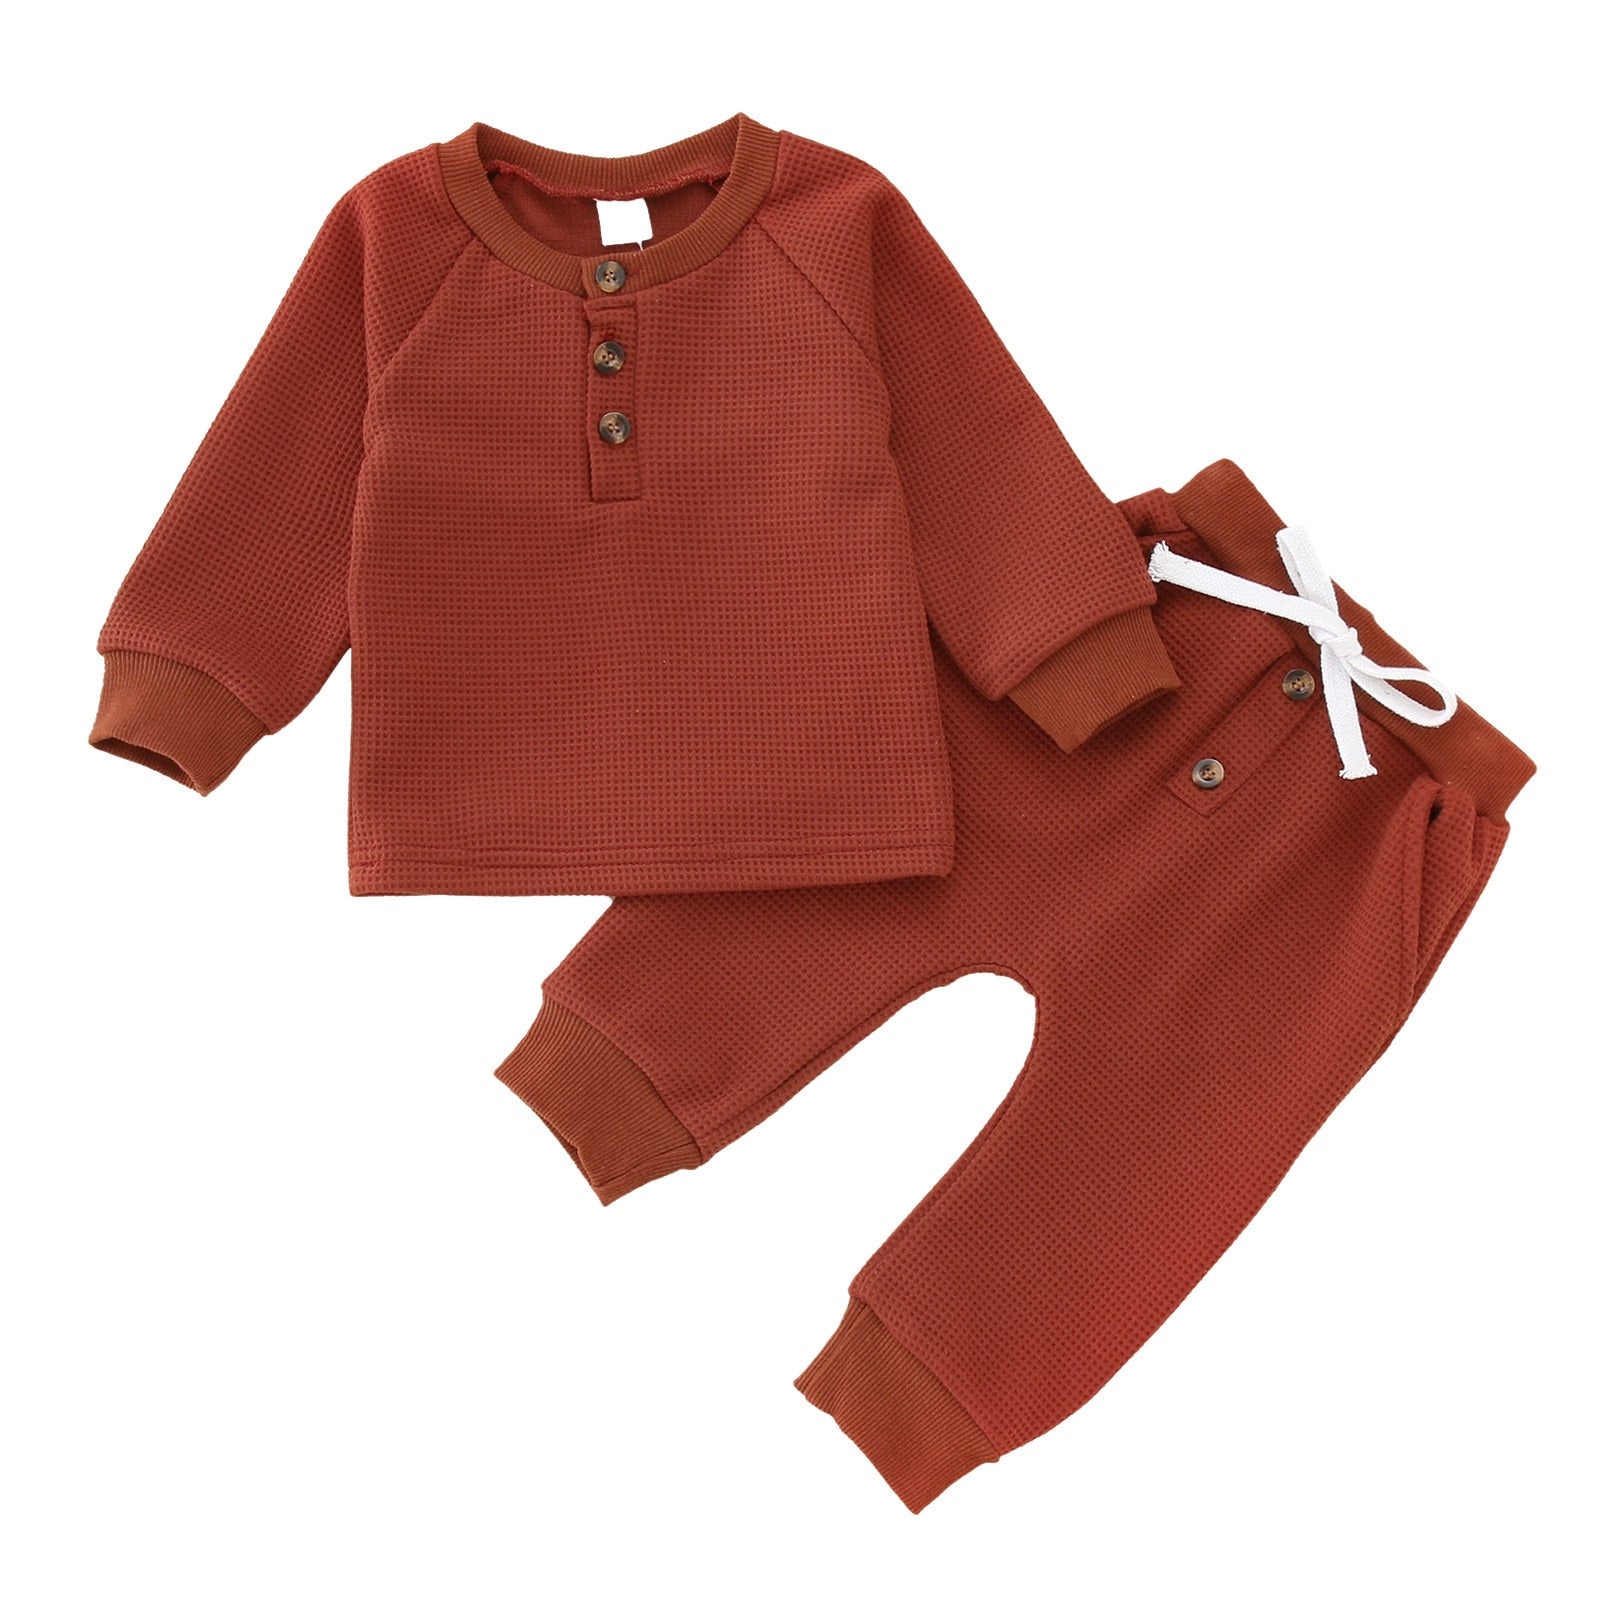 Infant Shirt with Bow Tie Toddler Boys Winter Long Sleeve Solid Colors 2PCS Outfit